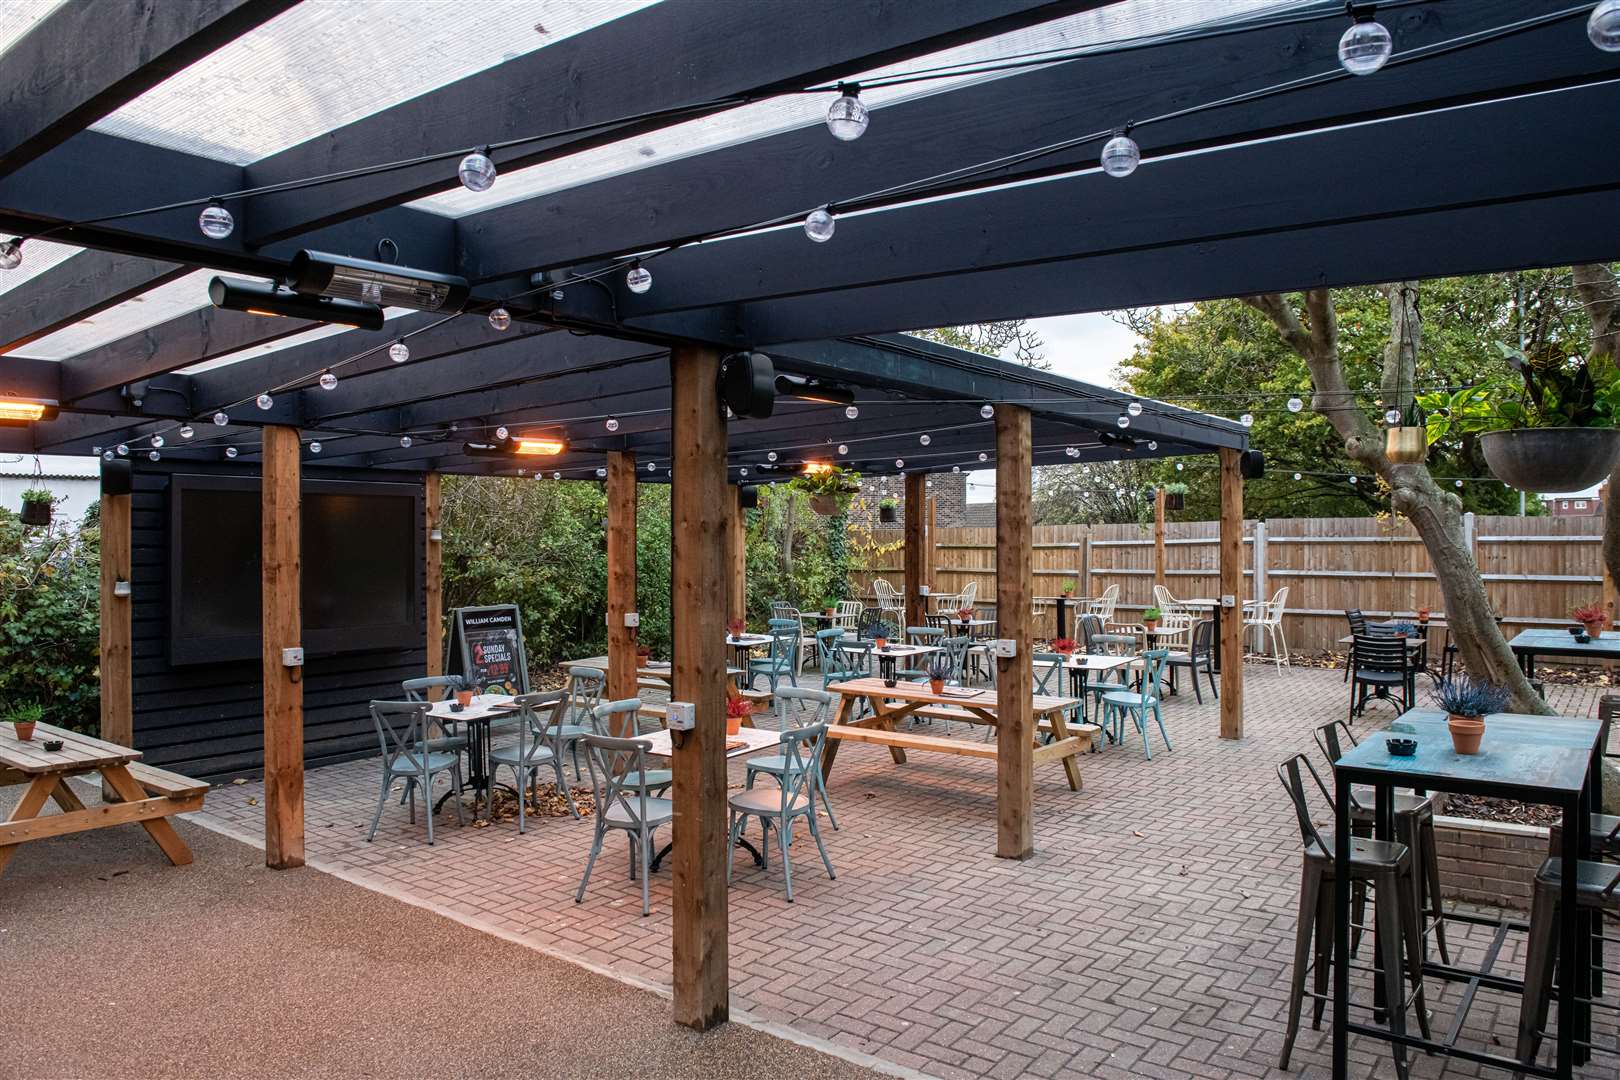 Part of the refurbishments included an extended outdoor seating area, where visitors can watch games on an 82" screen